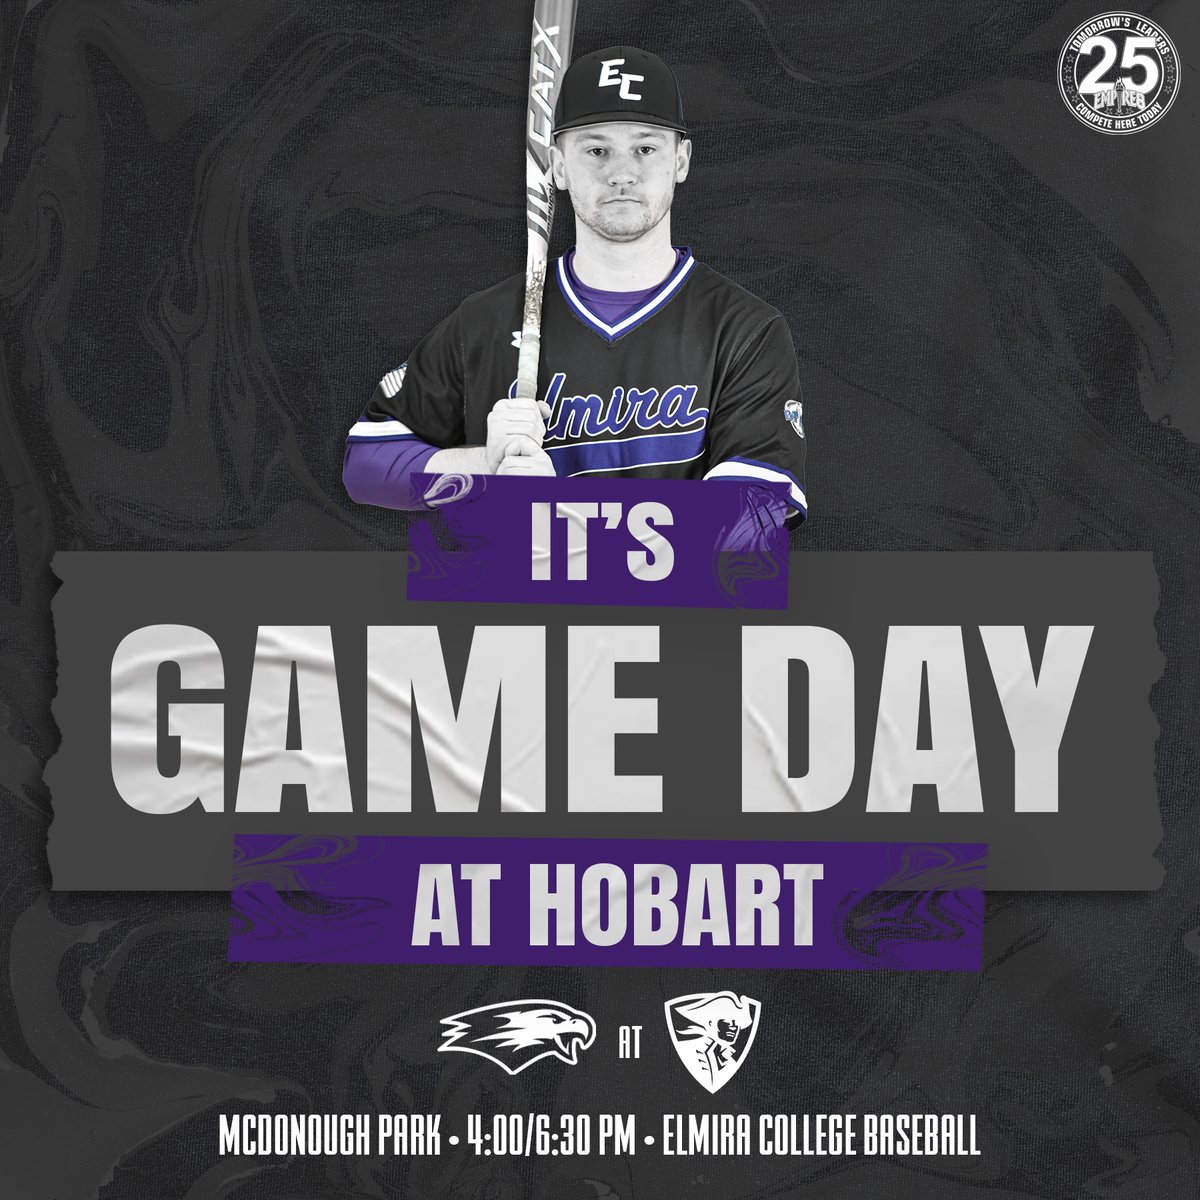 A trip up Route 14 this afternoon for @ElmiraBaseball as the Soaring Eagles face the Statesmen in a non-conference doubleheader!
 
🆚 Hobart
🕓 4:00/6:30 PM
📍 Geneva, NY | McDonough Park
📊&📺: rb.gy/3nbolr
 
#TogetherWeFly #FightOn4EC #ElmiraProud